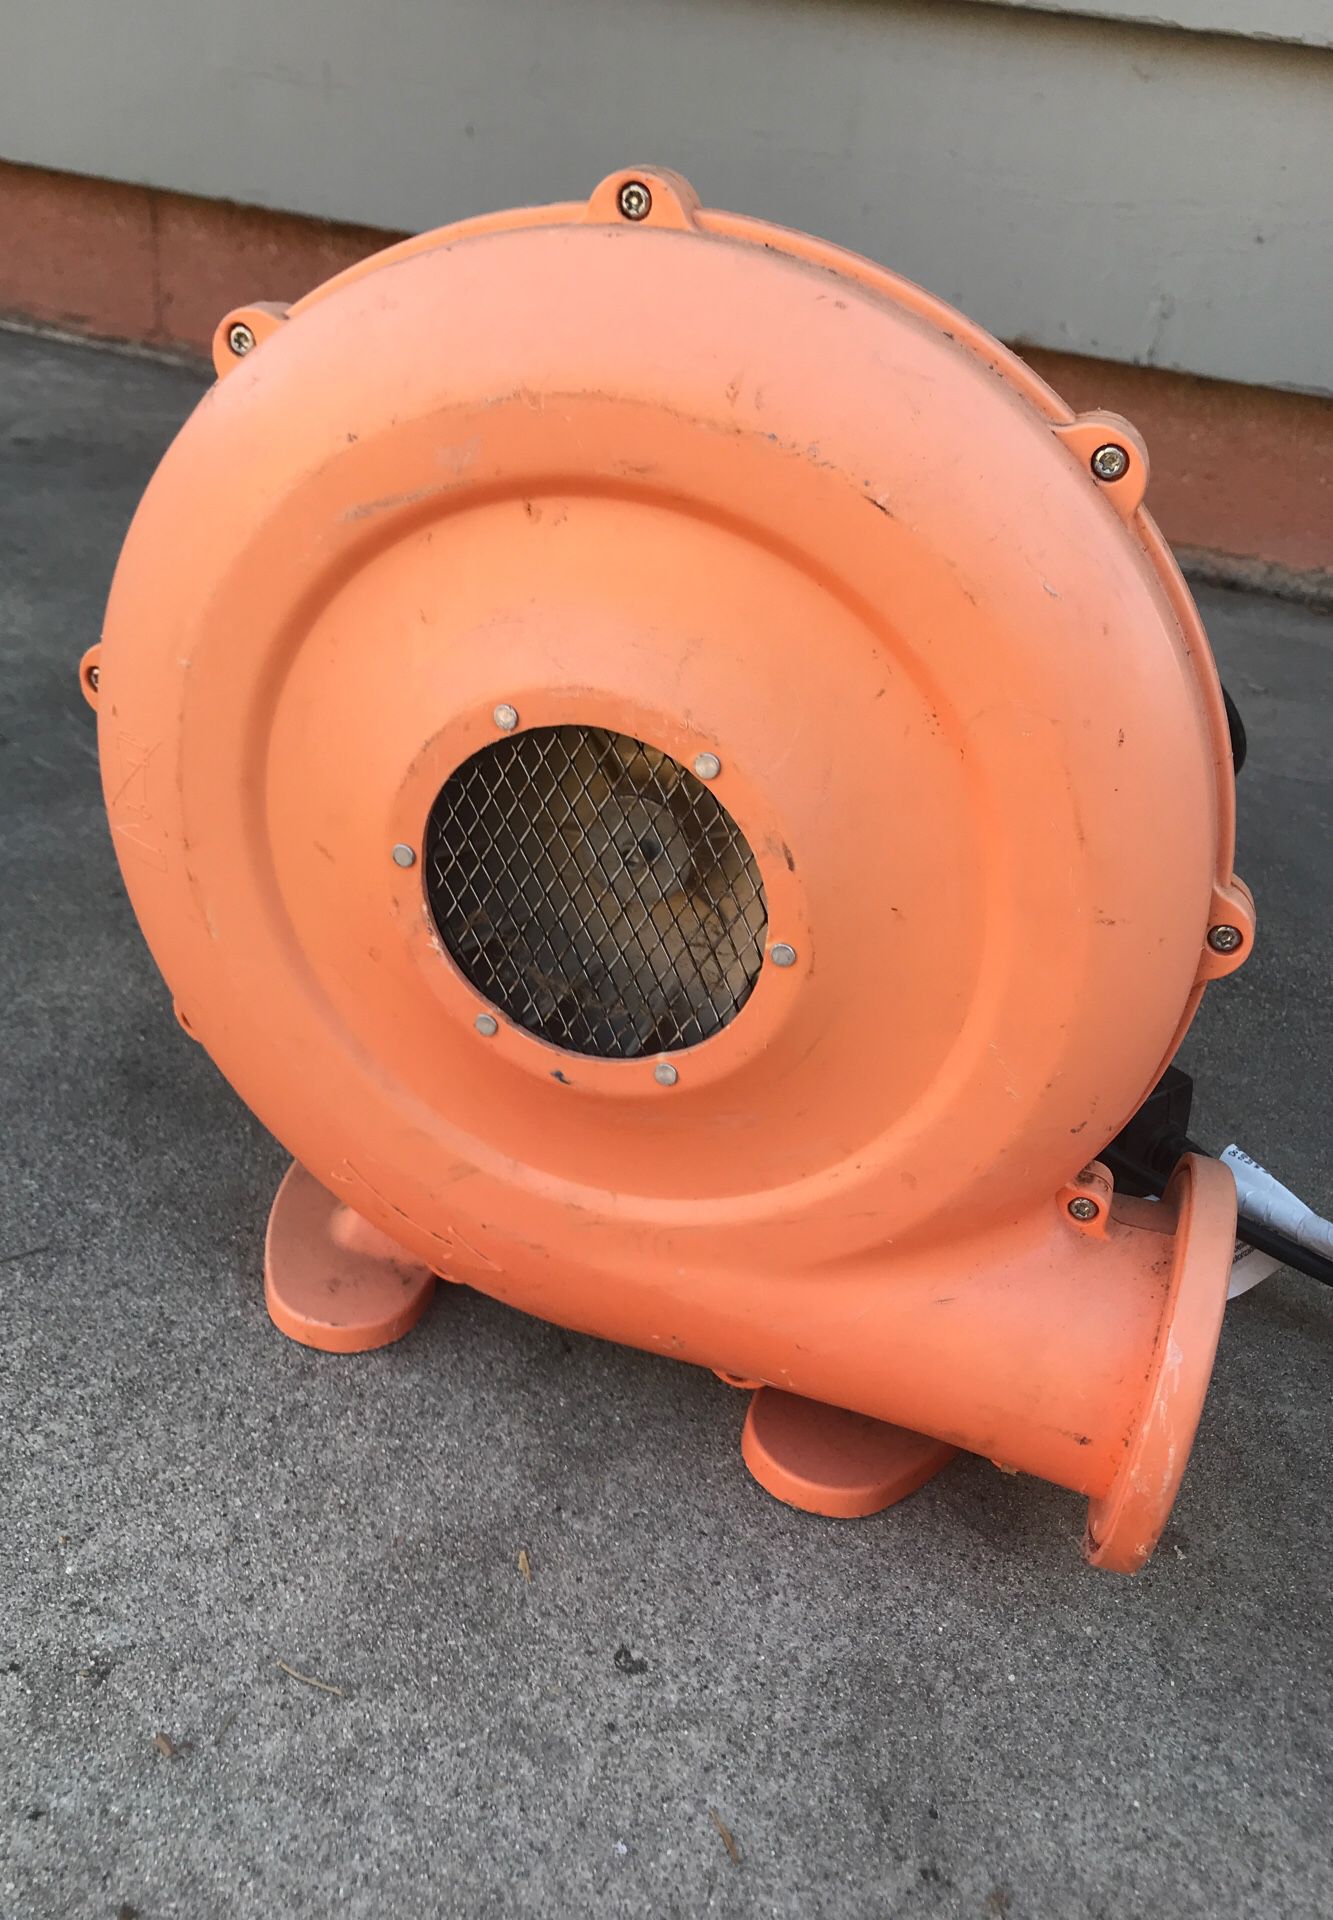 Air mover / blower